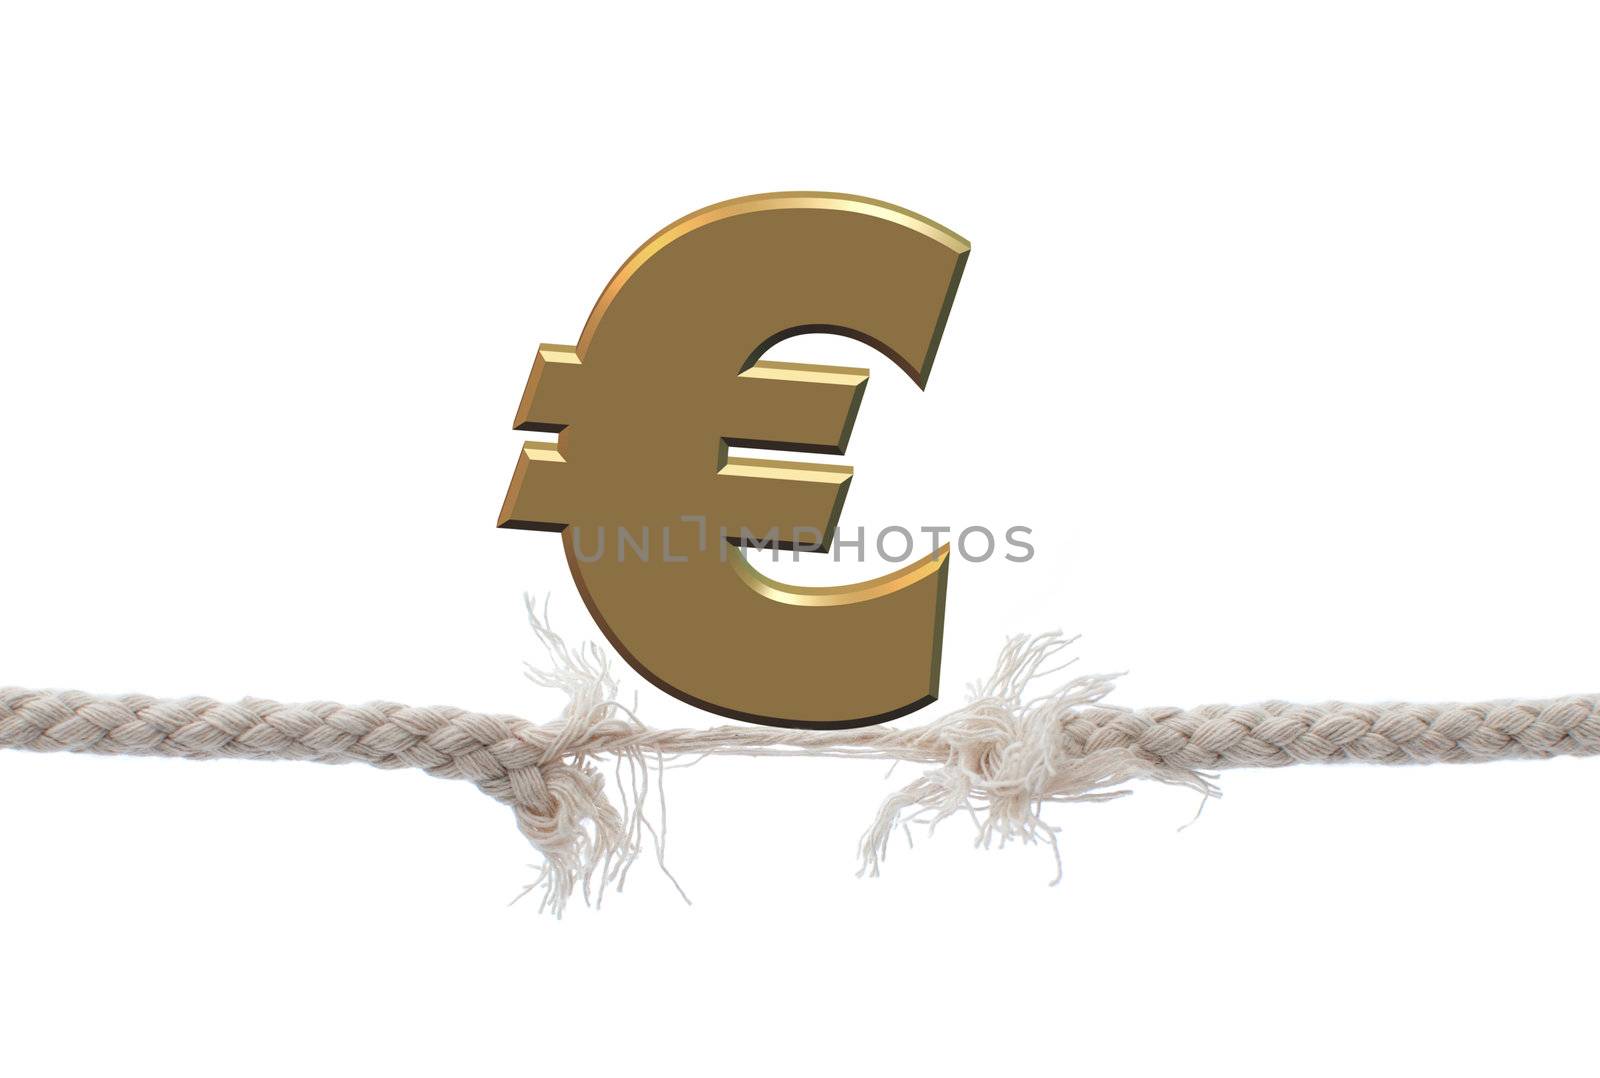 Euro symbol on top of a tightrope